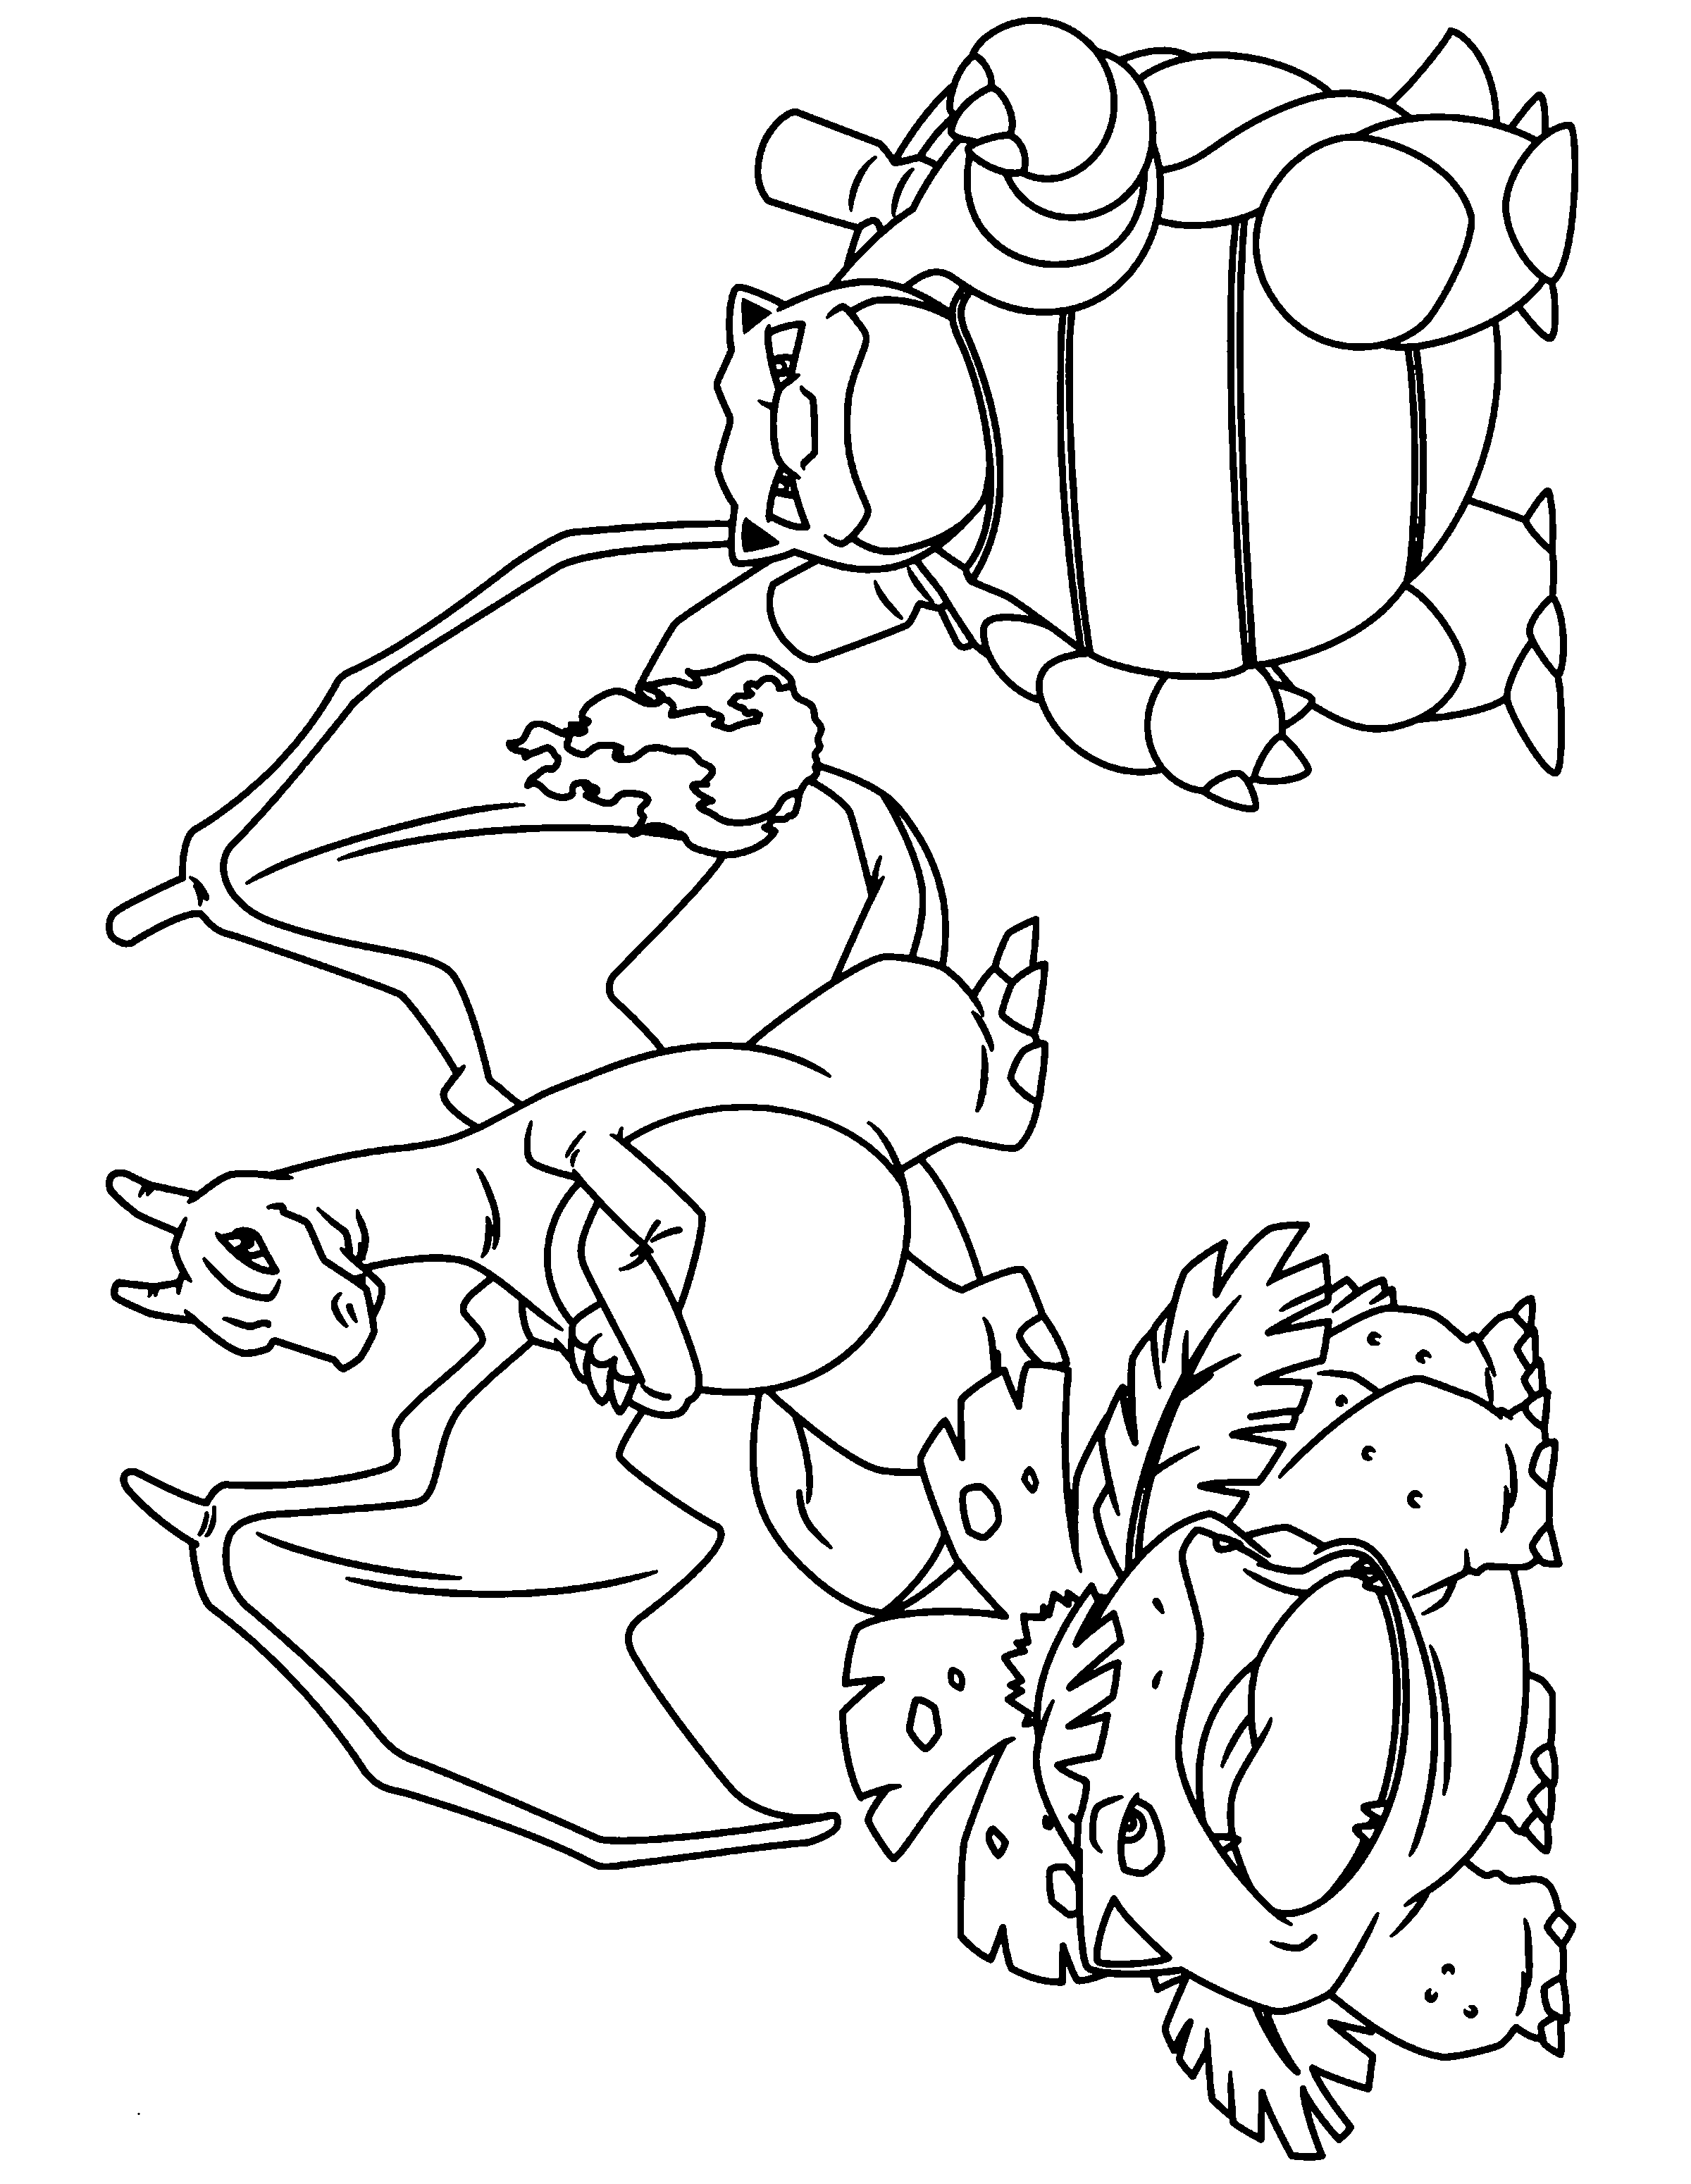 Coloring Page Pokemon Advanced Coloring Pages 174 Pokemon Coloring Pages Pokemon Colo